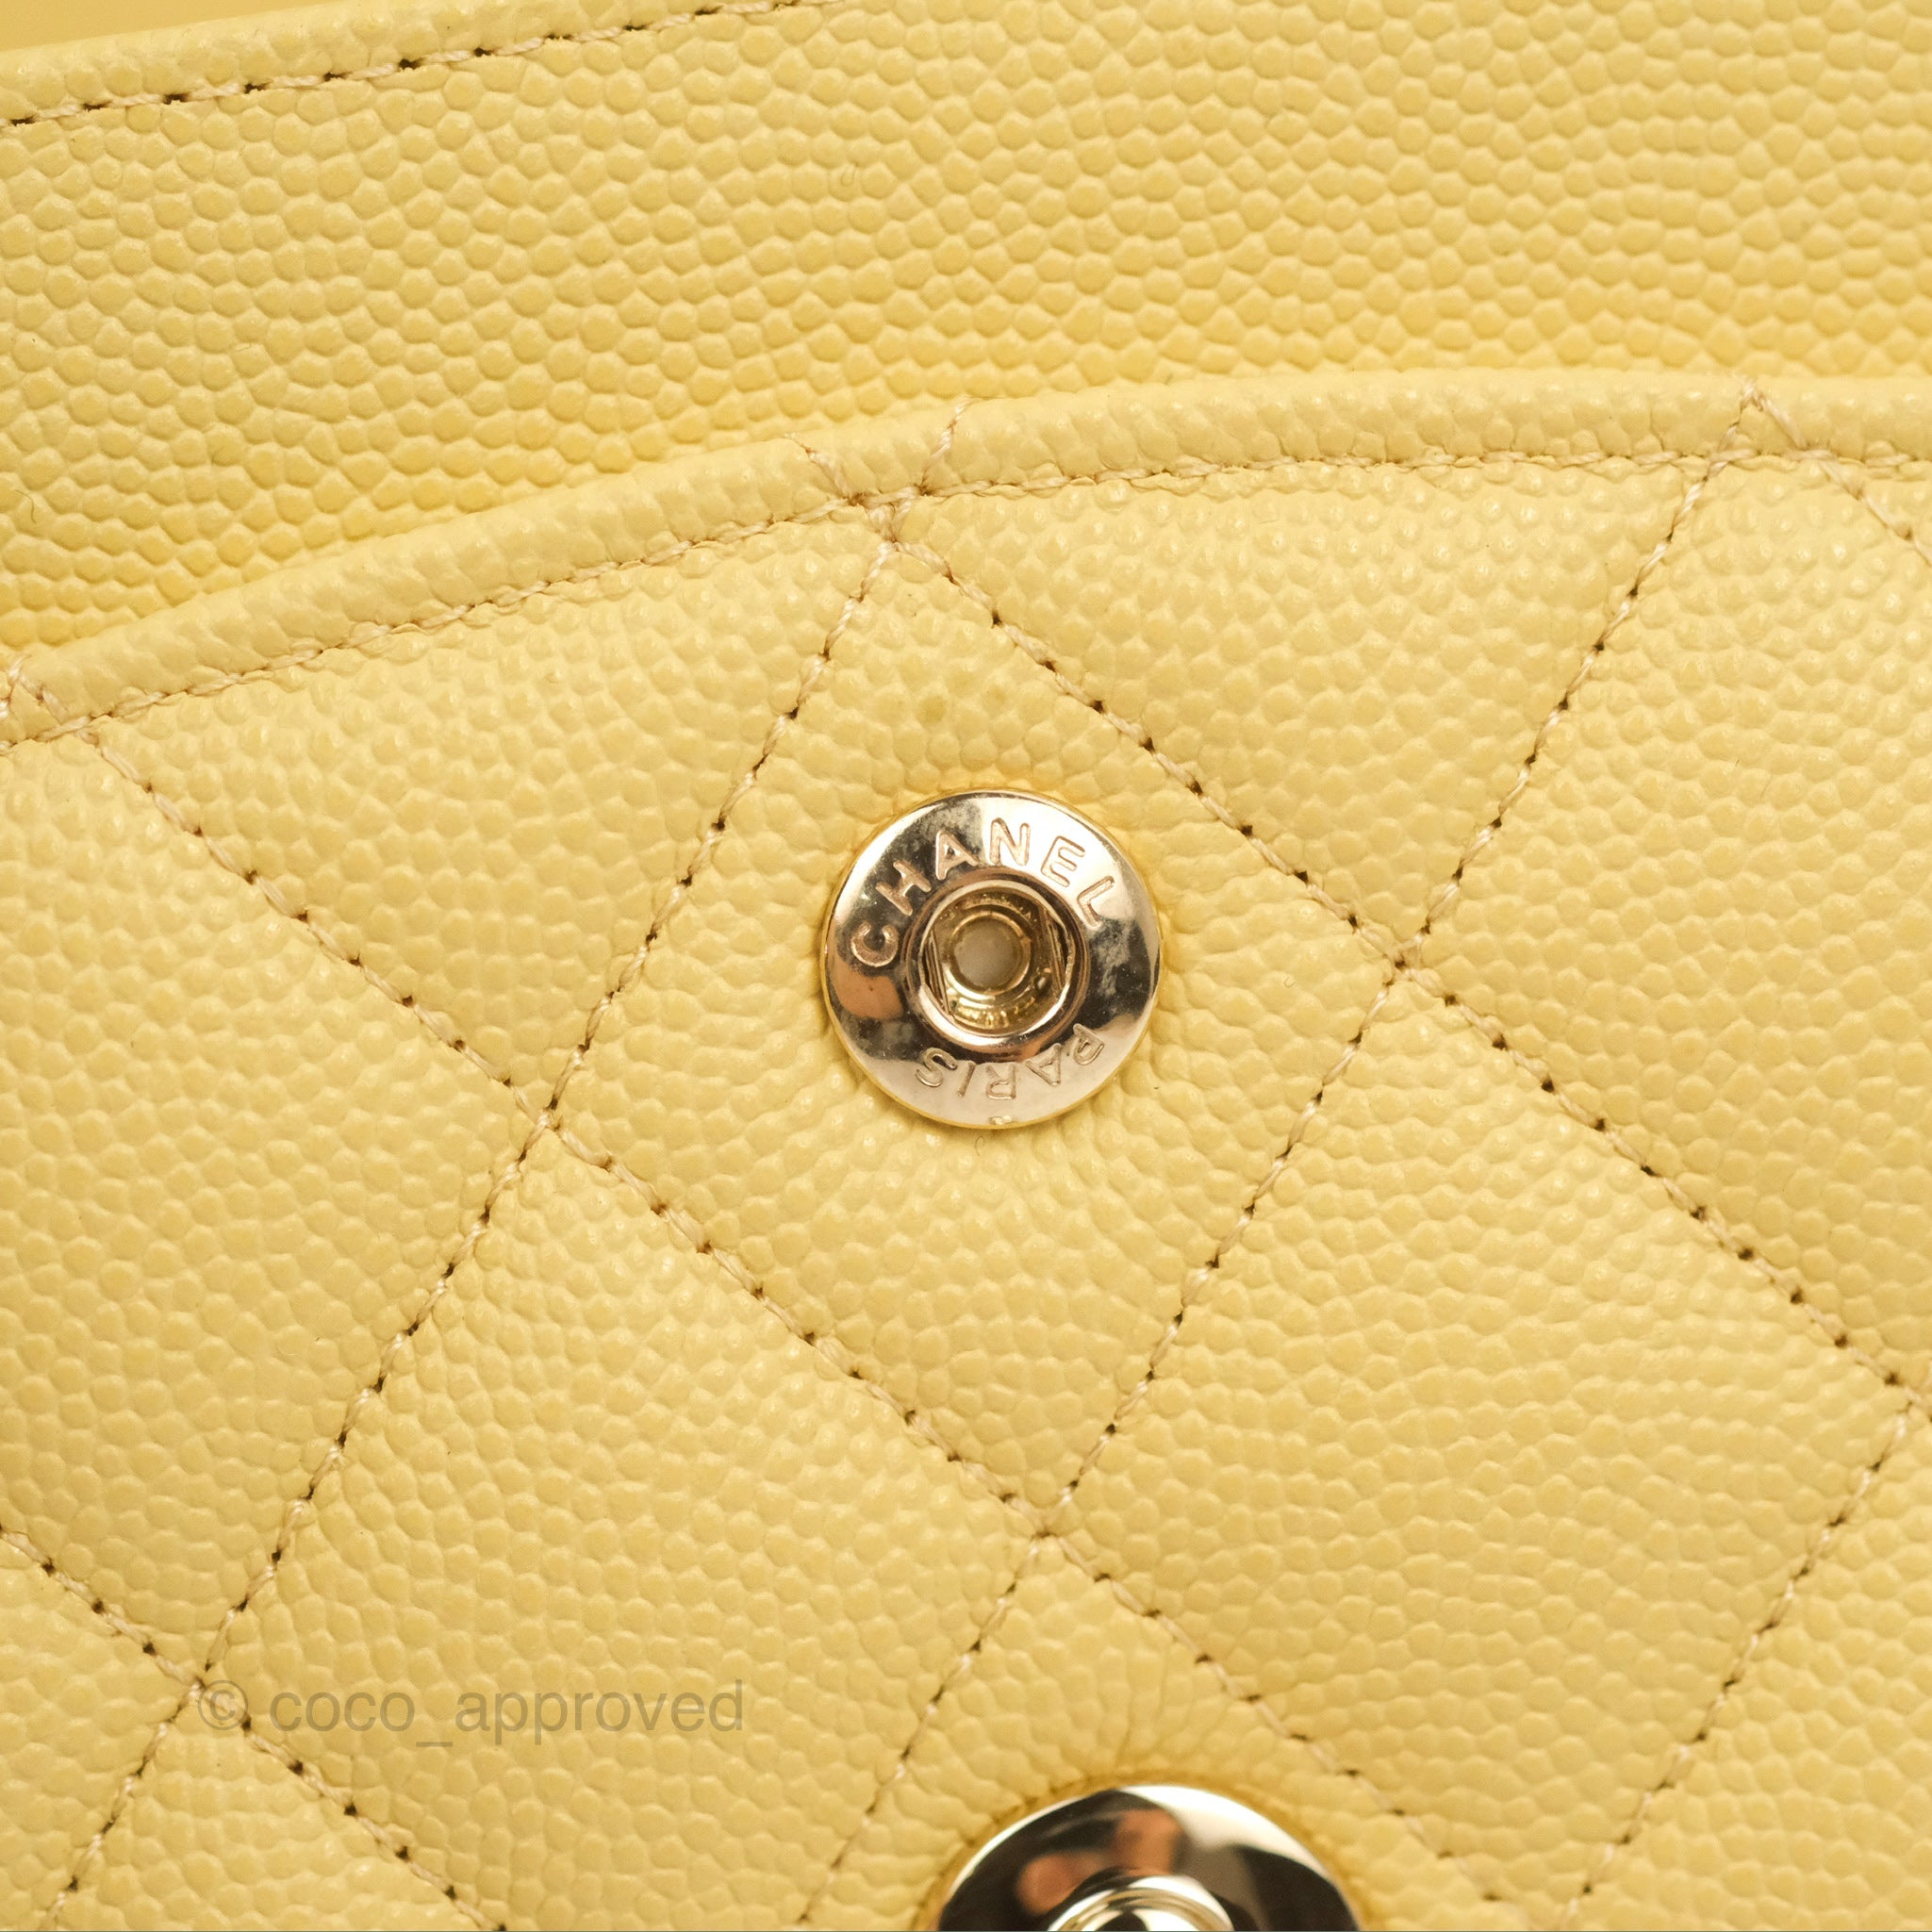 Chanel Yellow Quilted Caviar Leather Maxi Classic Single Flap Bag